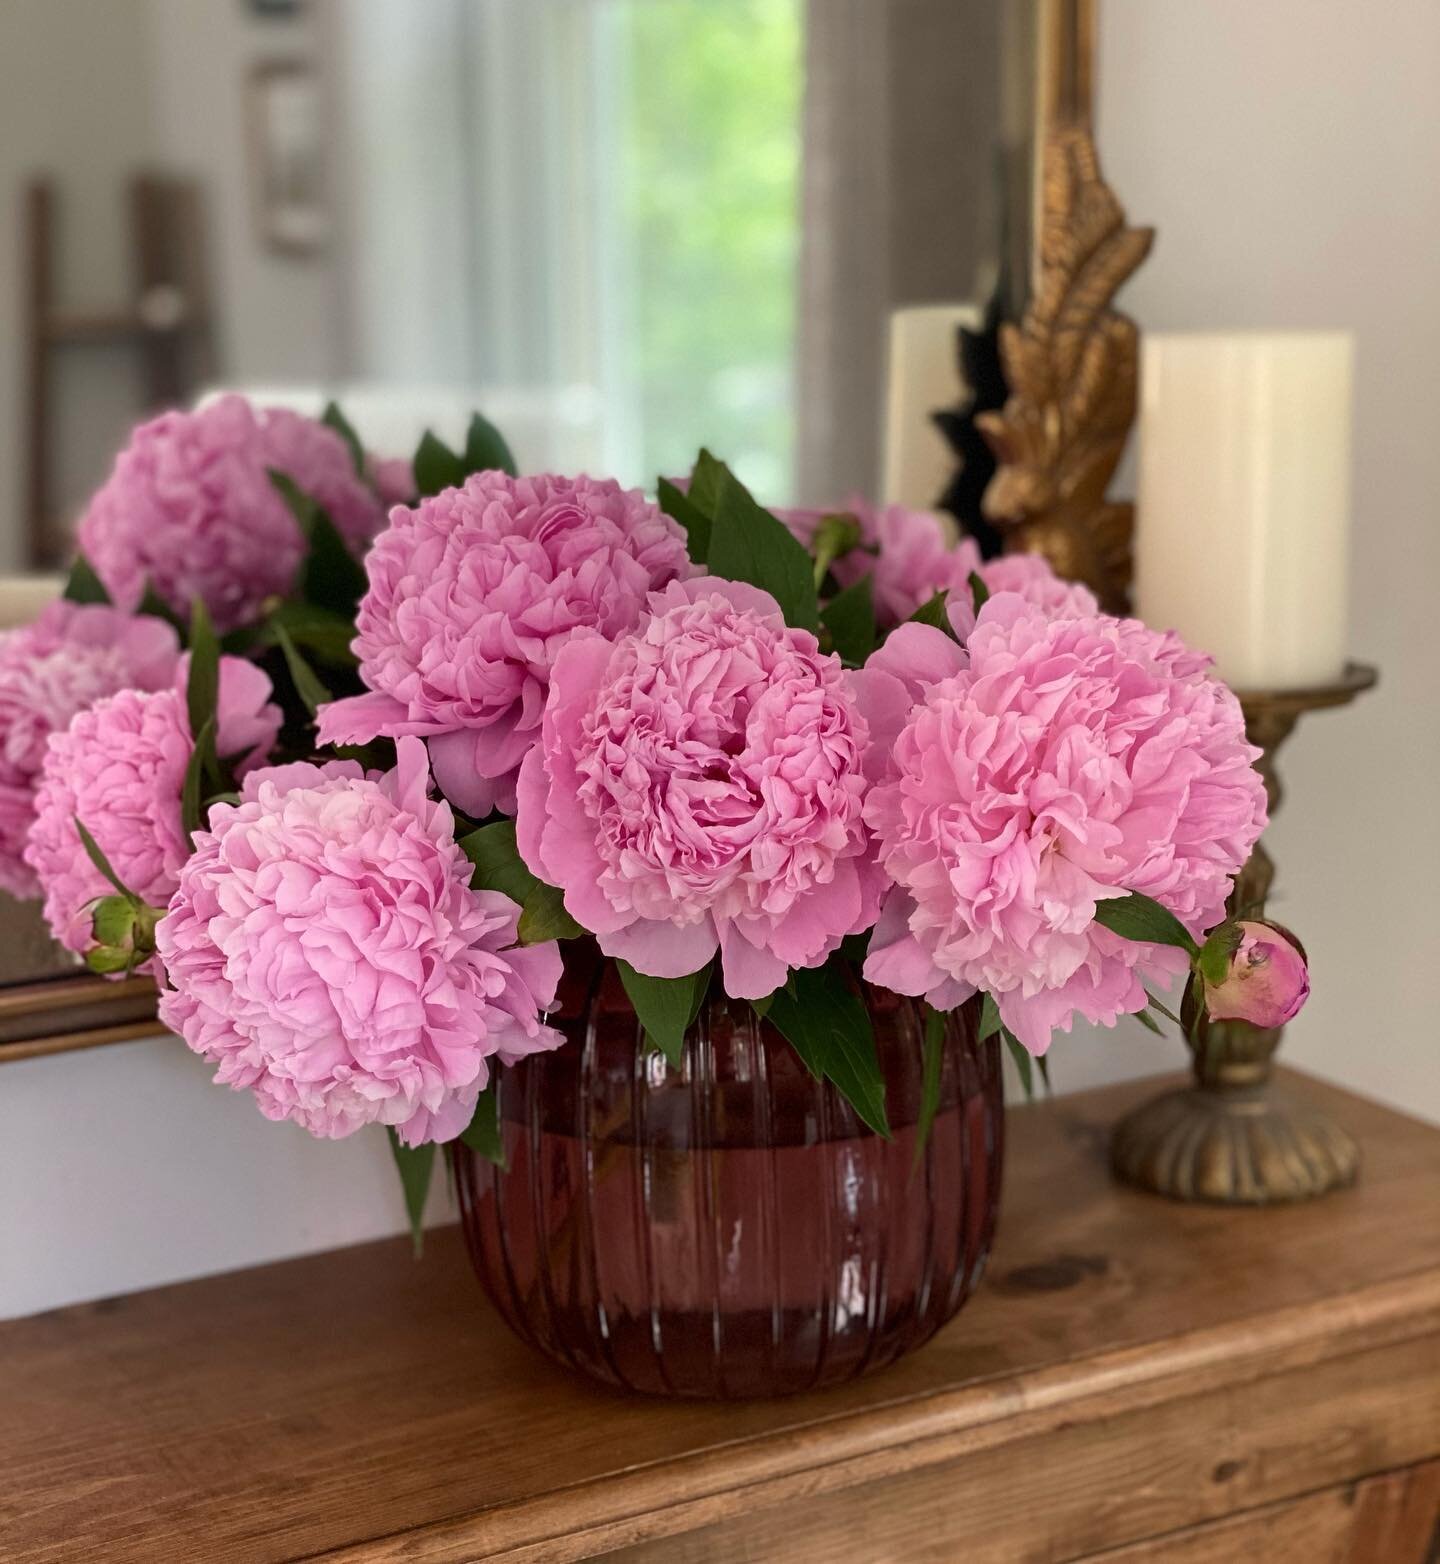 Sometimes I can&rsquo;t tell if this is a gardening account or design account... 🤷🏻&zwj;♀️🤦🏻&zwj;♀️🙋🏻&zwj;♀️ but when you have peonies growing out of your ears, you have to share their beauty. 🌸🌸🌸 🐝
&bull;
&bull;
&bull;
&bull;
&bull;
&bull;